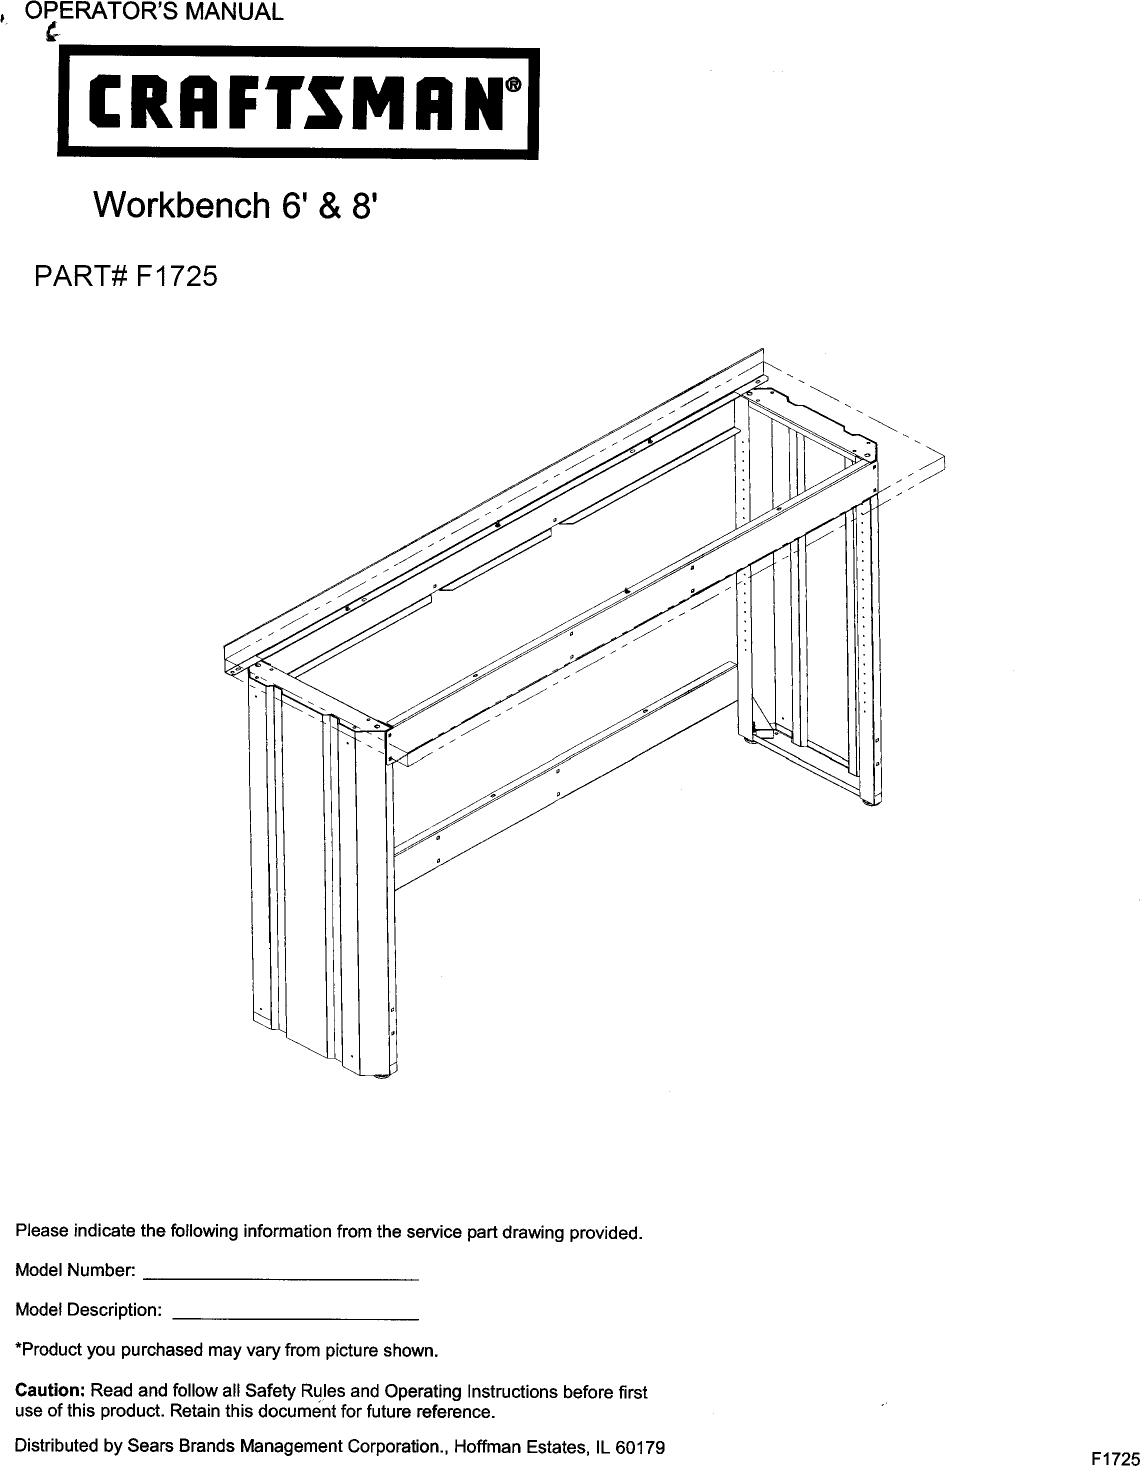 Page 1 of 8 - Craftsman 706149250 User Manual  WORK BENCH - Manuals And Guides L1002168